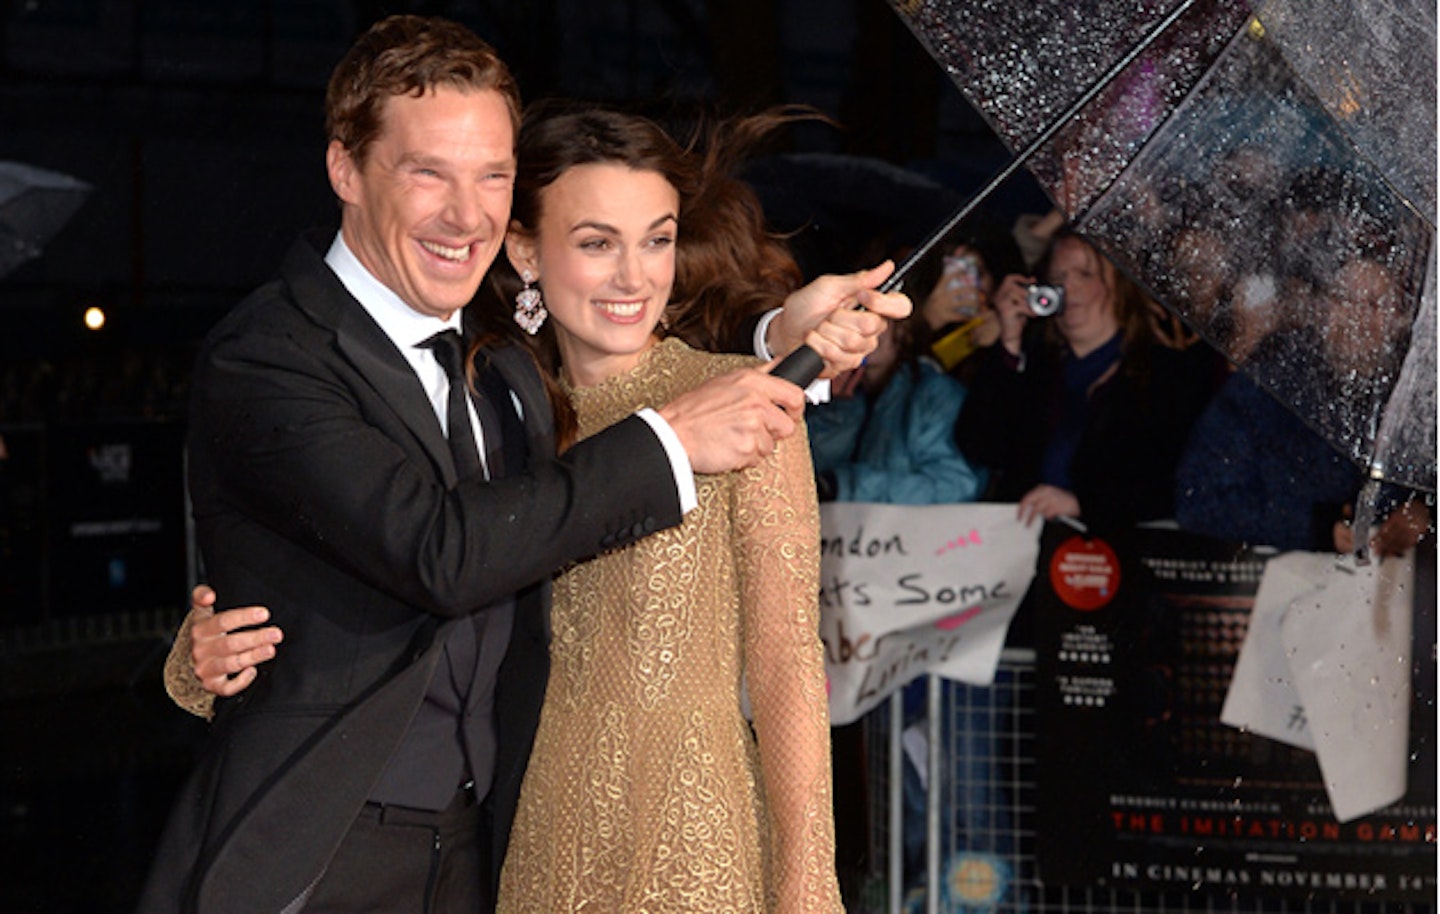 Benedict Cumberbatch and Keira Knightley at the London Film Festival Imitation Game Opening Gala